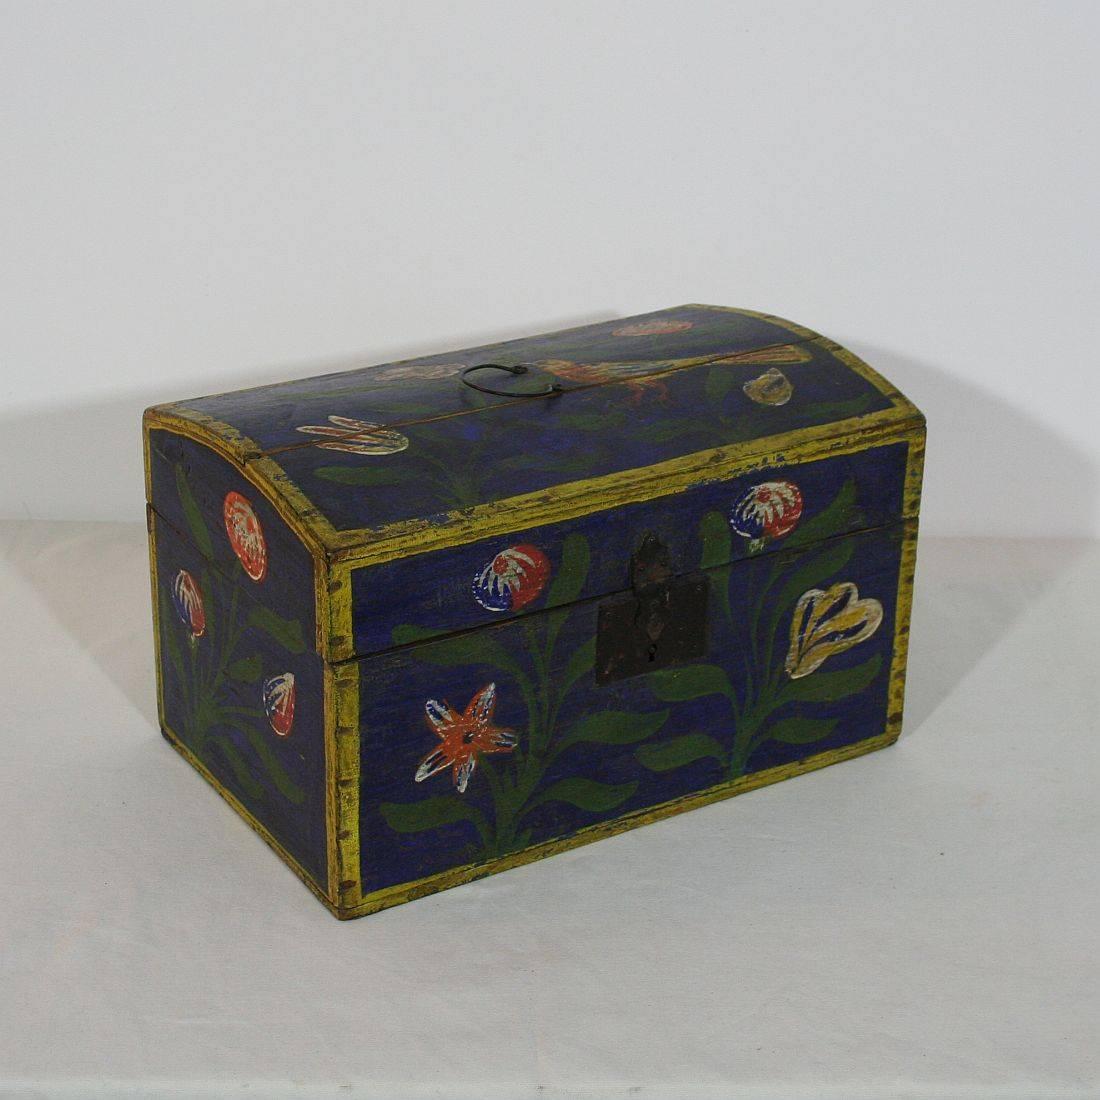 Painted 19th Century French Folk Art Weddingbox from Normandy with a Bird